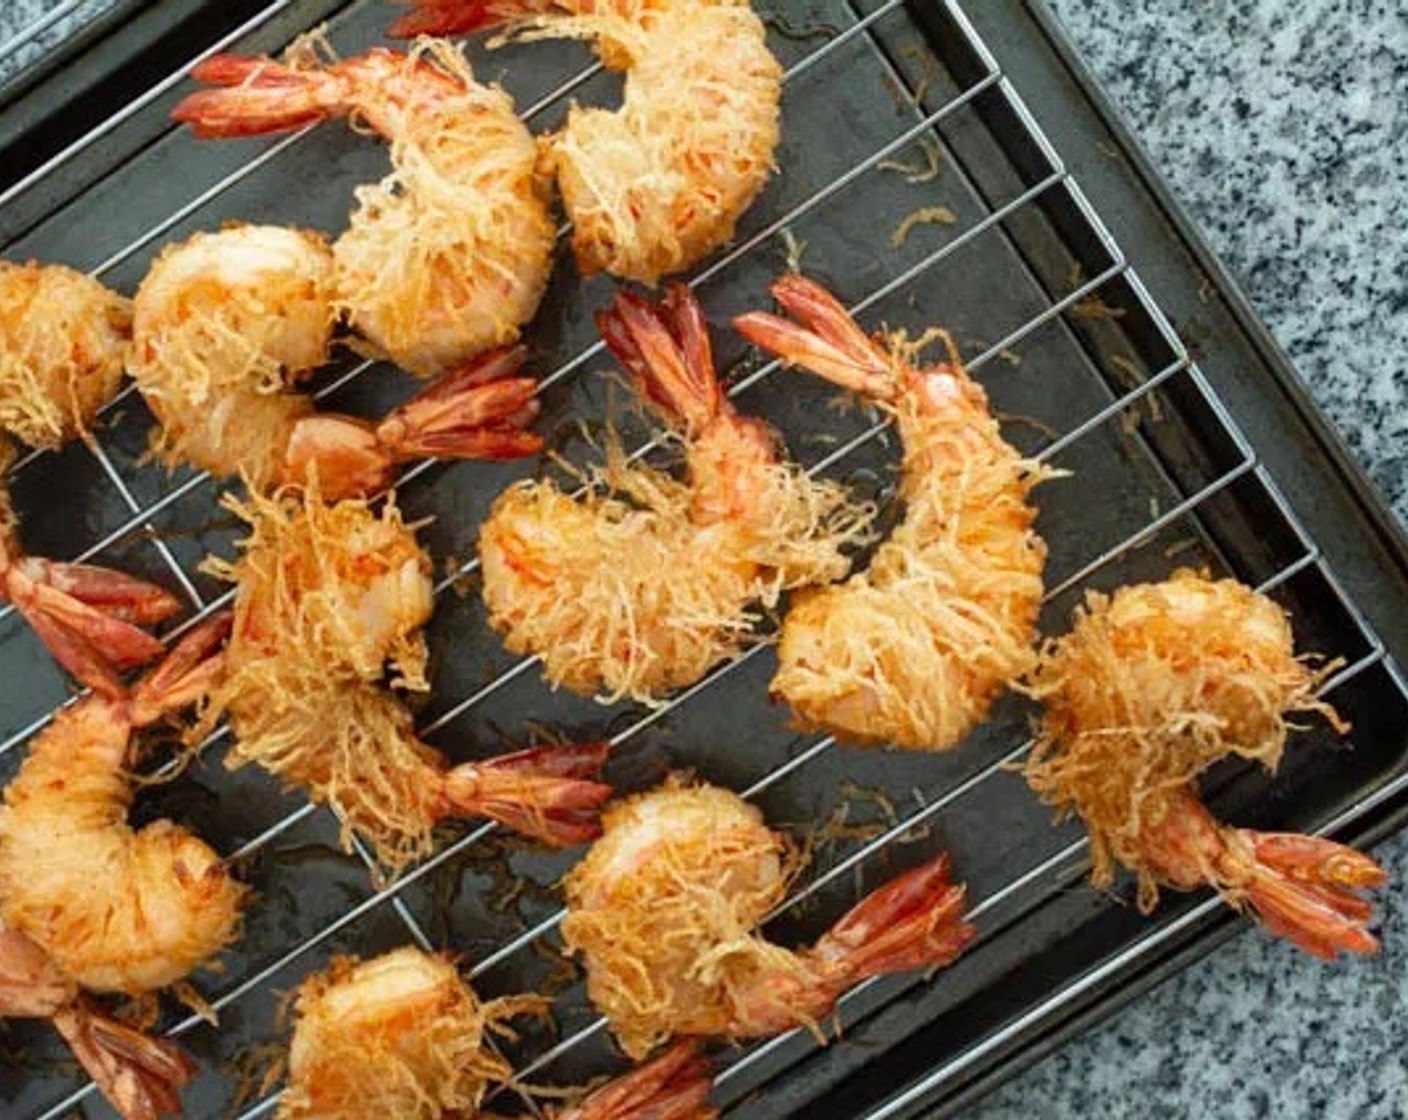 step 6 Place the fried shrimp on paper towels or on a cooling rack over a cookie sheet.